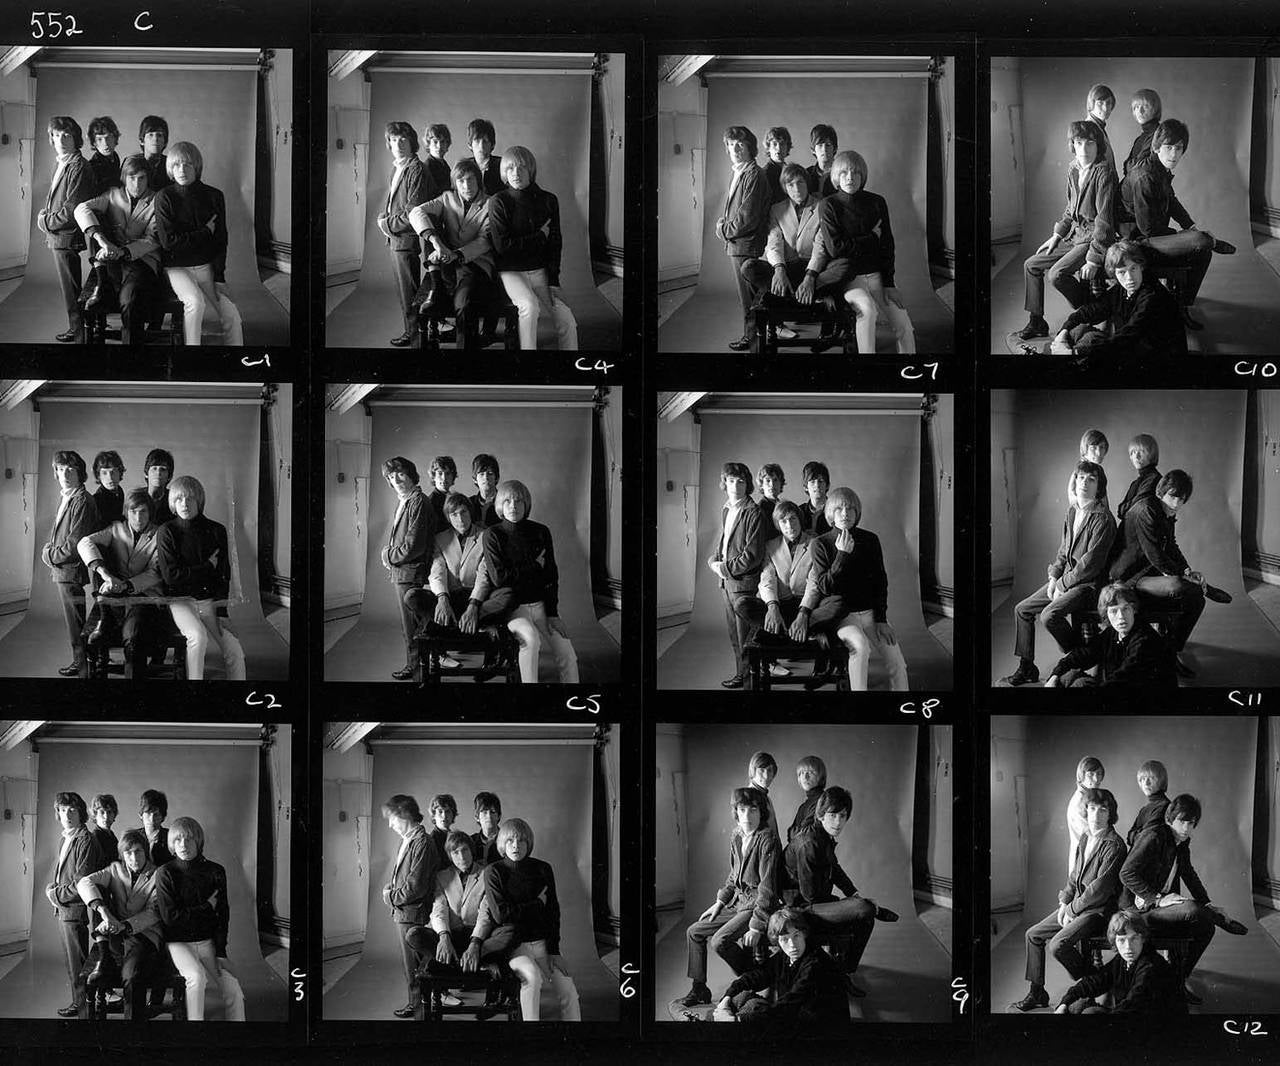 Gered Mankowitz Portrait Photograph - The Rolling Stones - Mason's Yard Contact Sheet